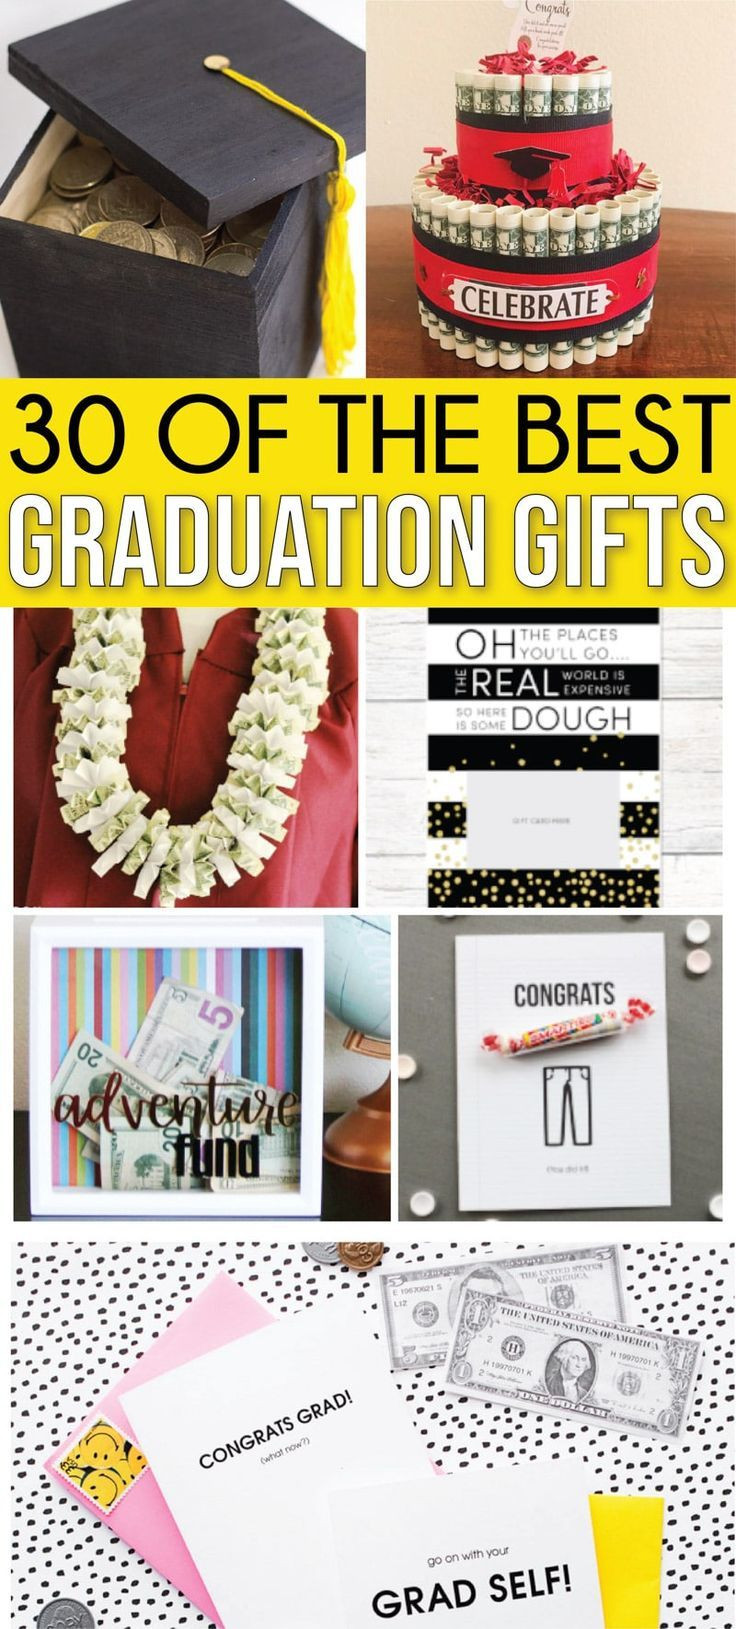 Personalized College Graduation Gift Ideas
 30 Graduation Gifts Graduates Actually Want